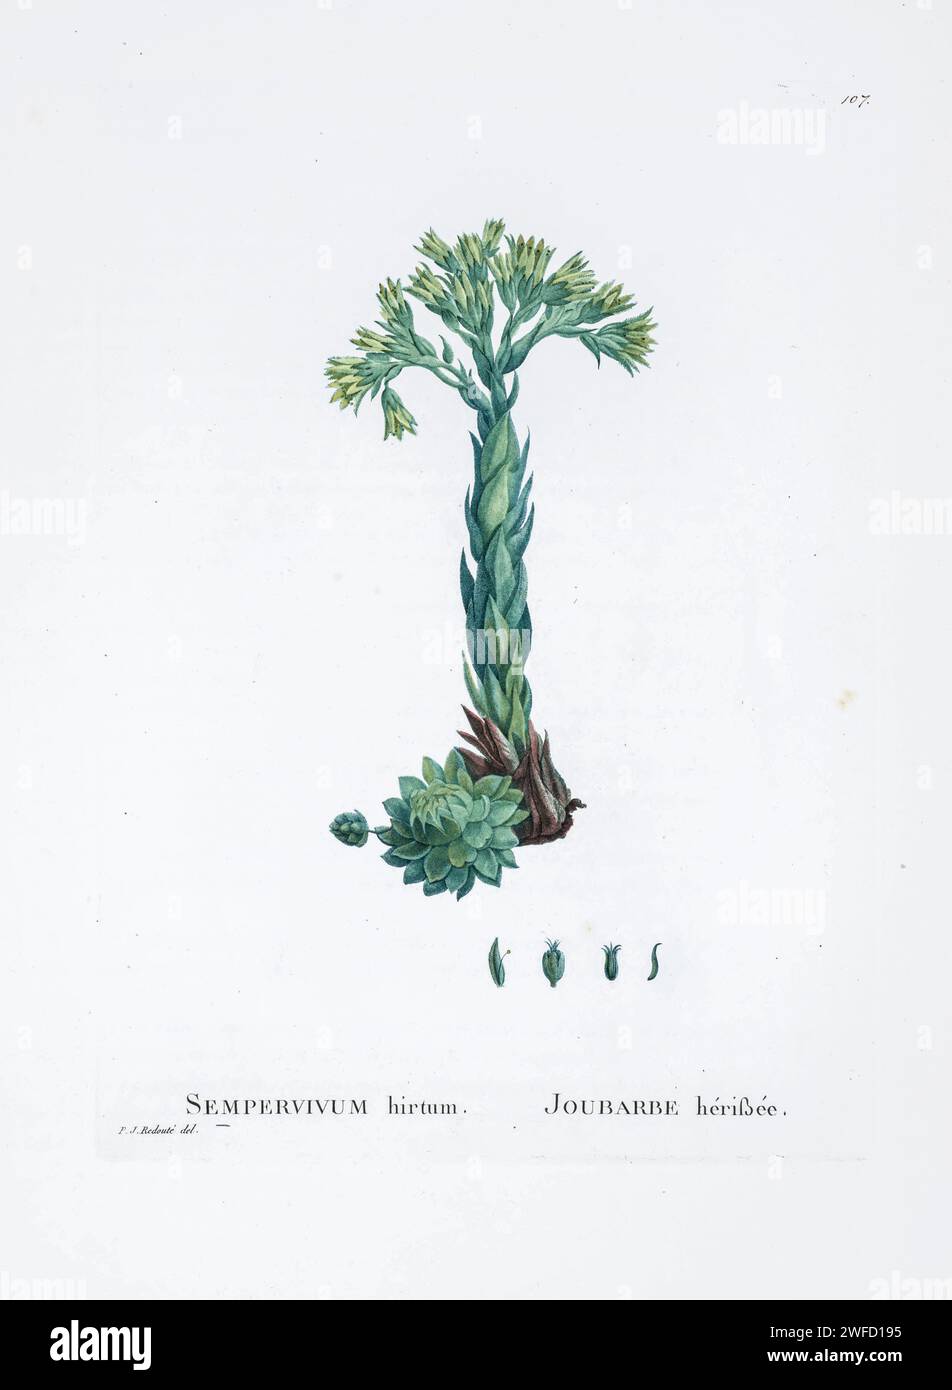 Sempervivum hirtum from History of Succulent Plants [Plantarum historia succulentarum / Histoire des plantes grasses] painted by Pierre-Joseph Redouté and described by Augustin Pyramus de Candolle 1799 Stock Photo